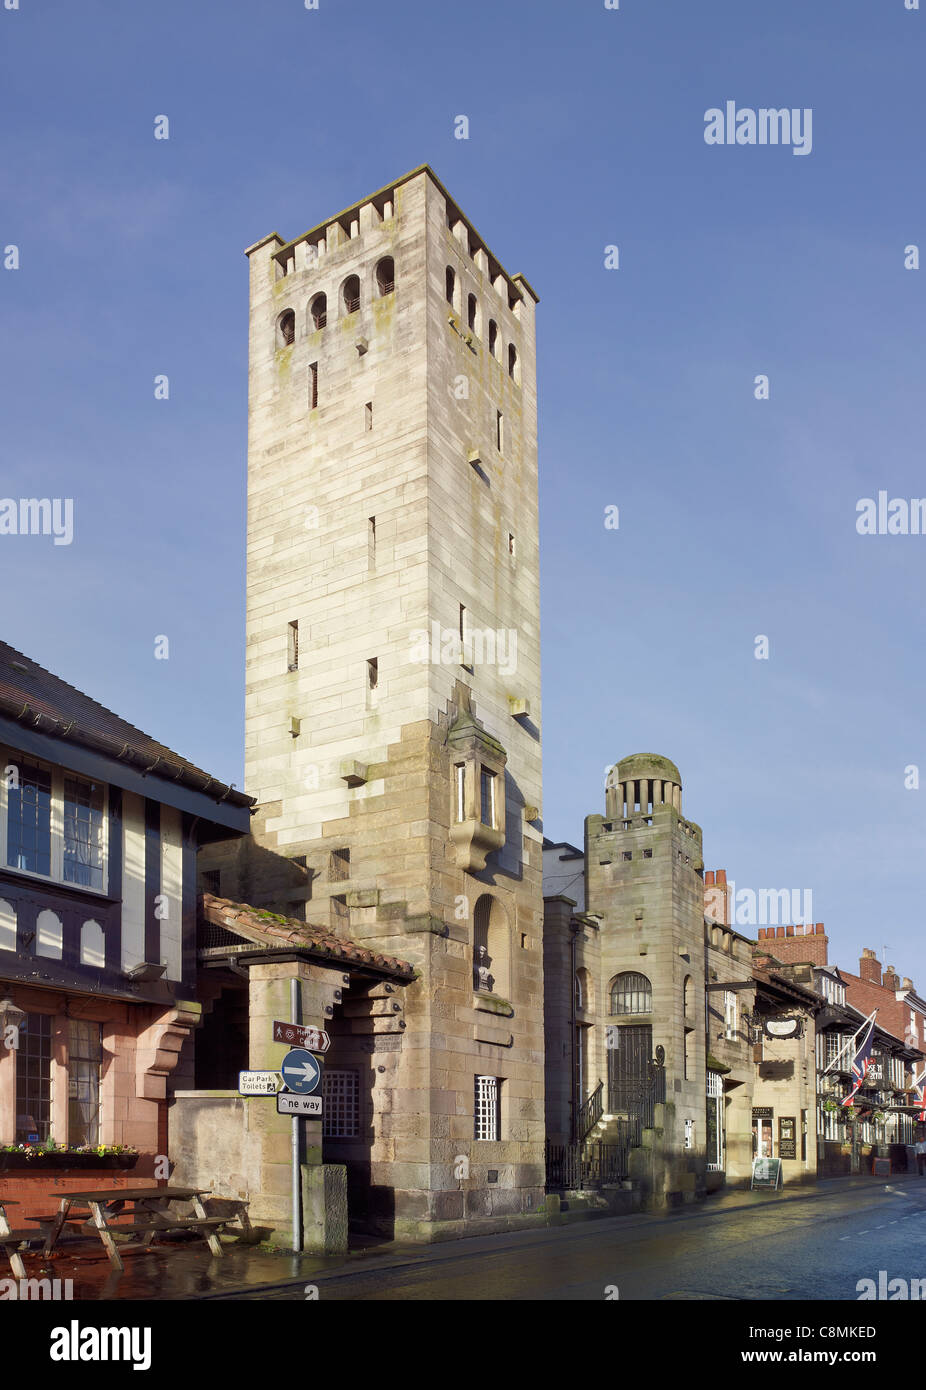 Gaskell Memorial Tower, Knutsford, Cheshire Stock Photo